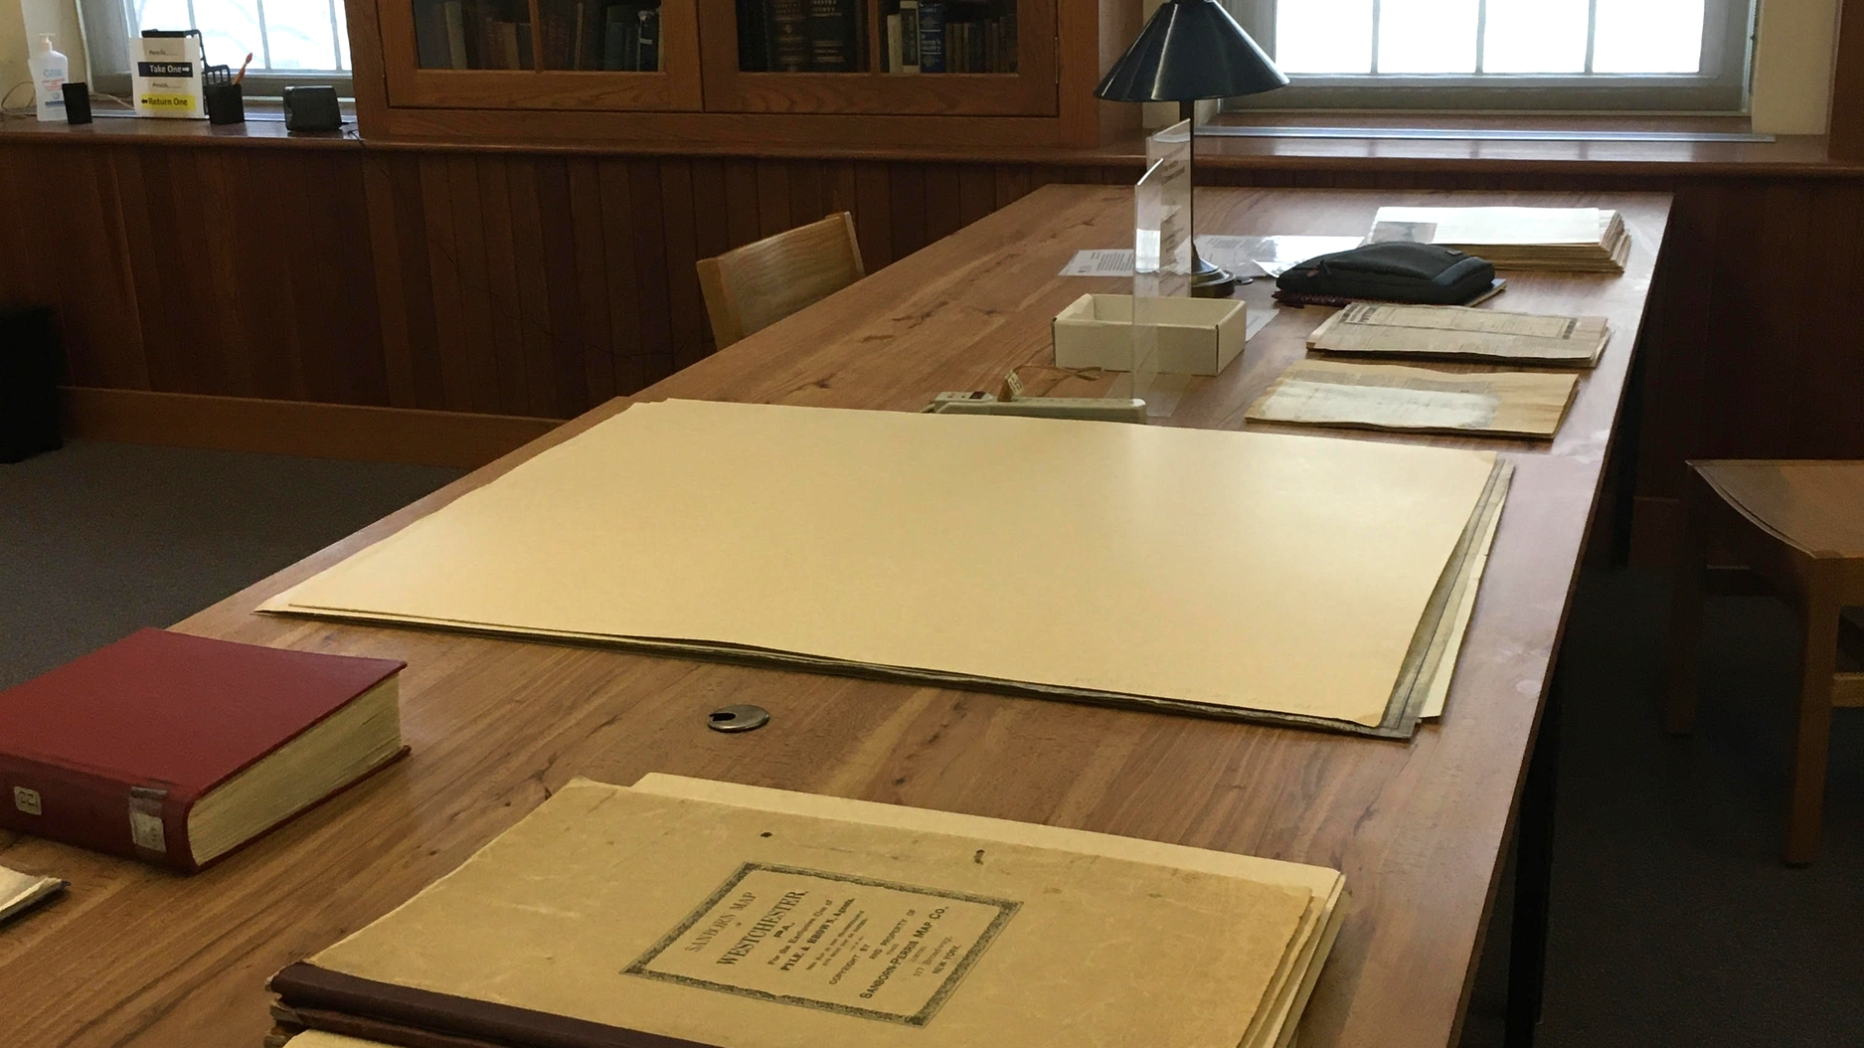 Pictures of the Chester County History Center Archives